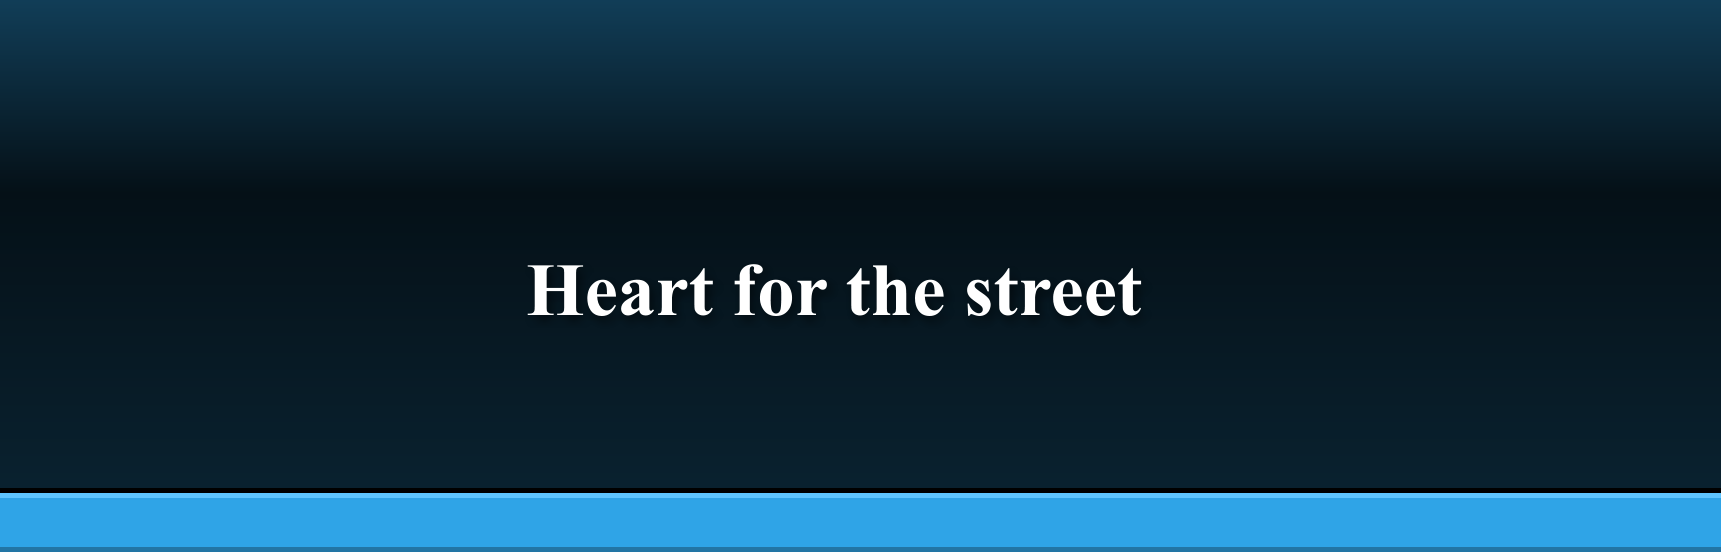 Heart for the street